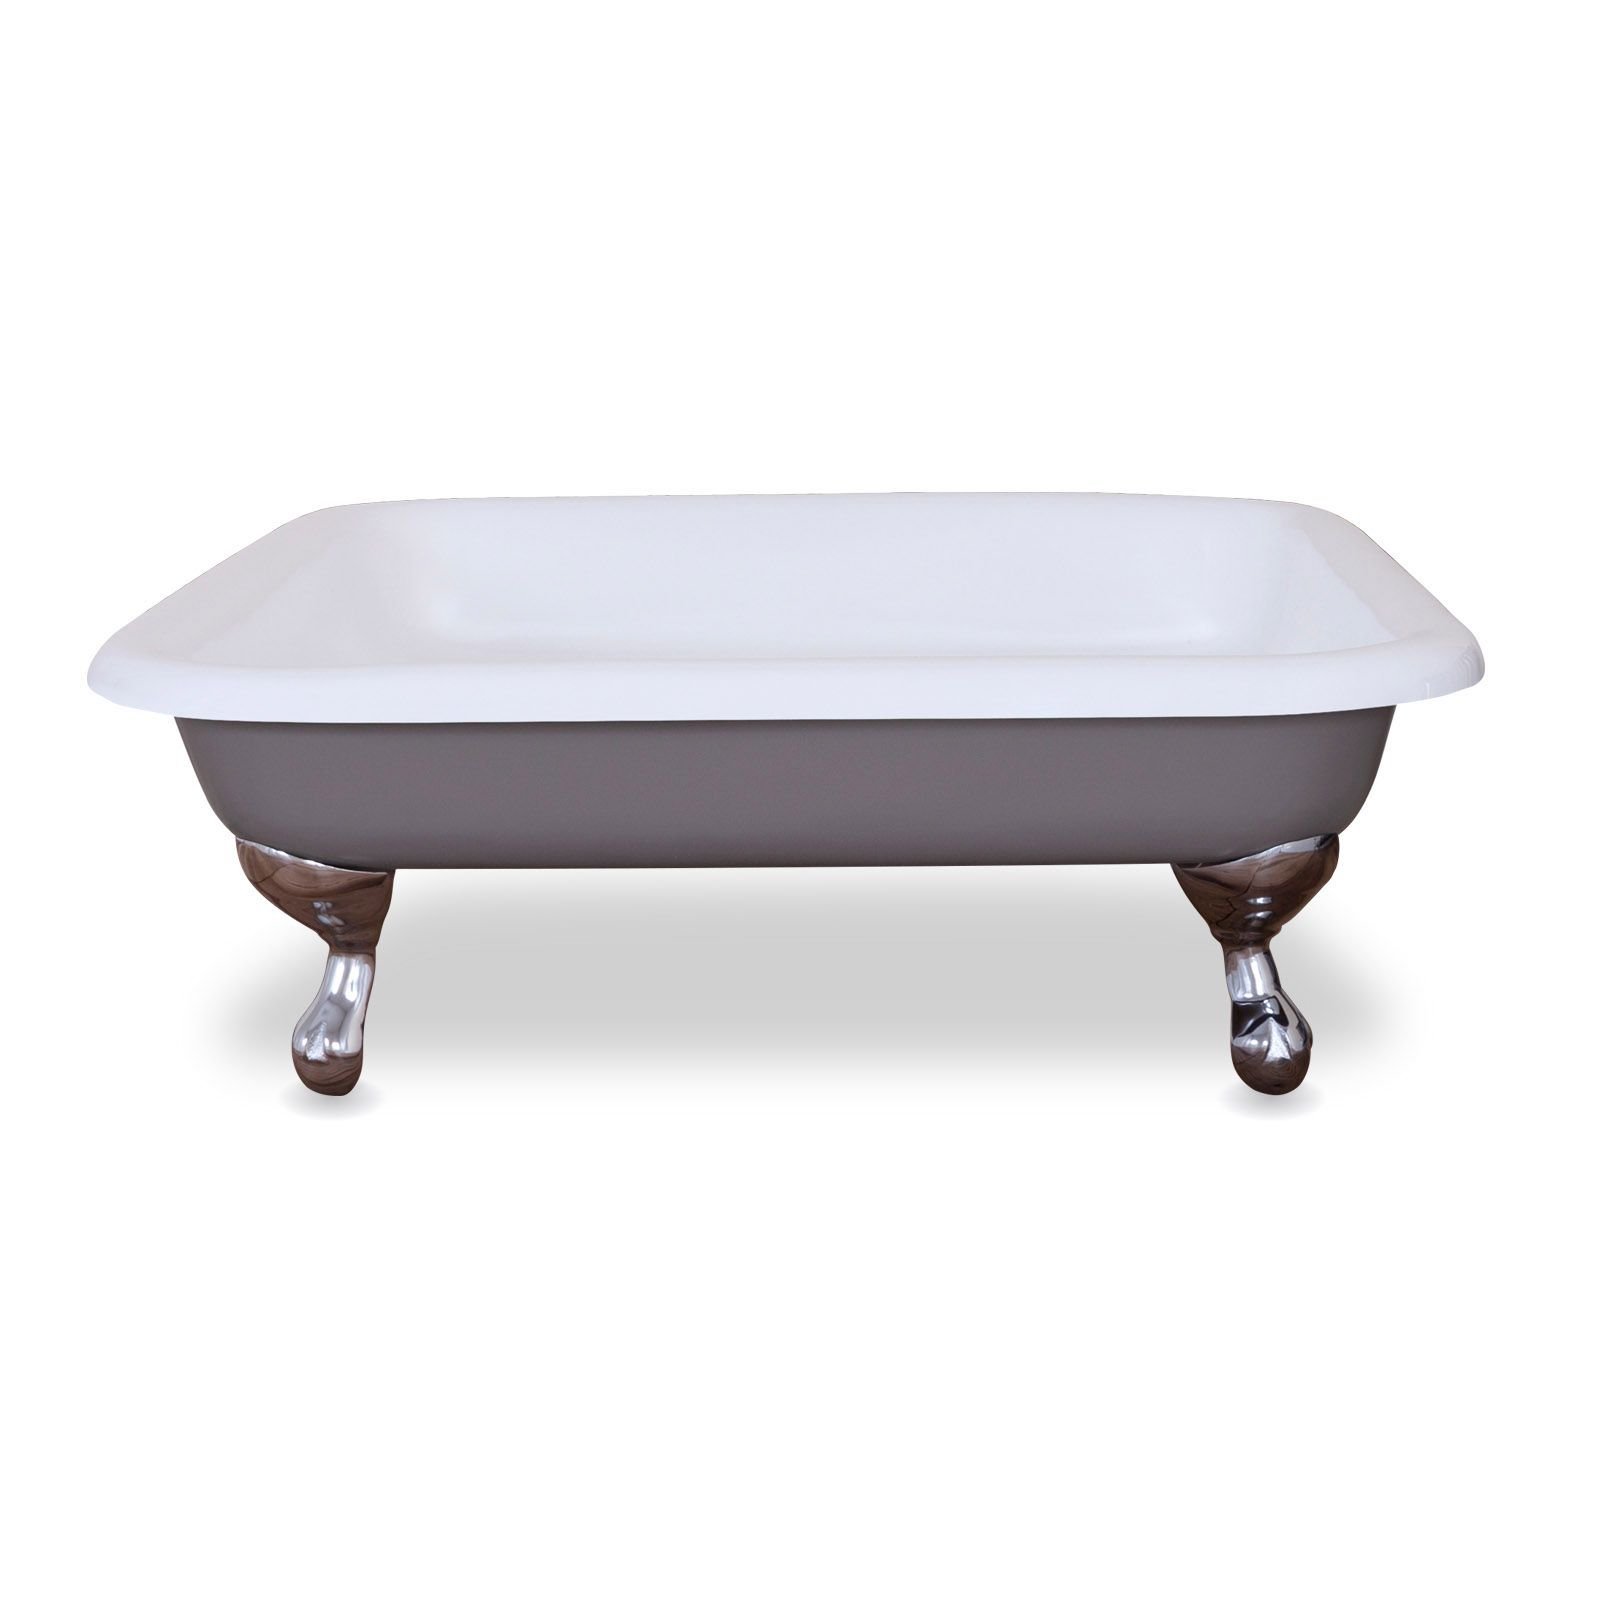 Benthall Cast Iron Shower Tray - painted